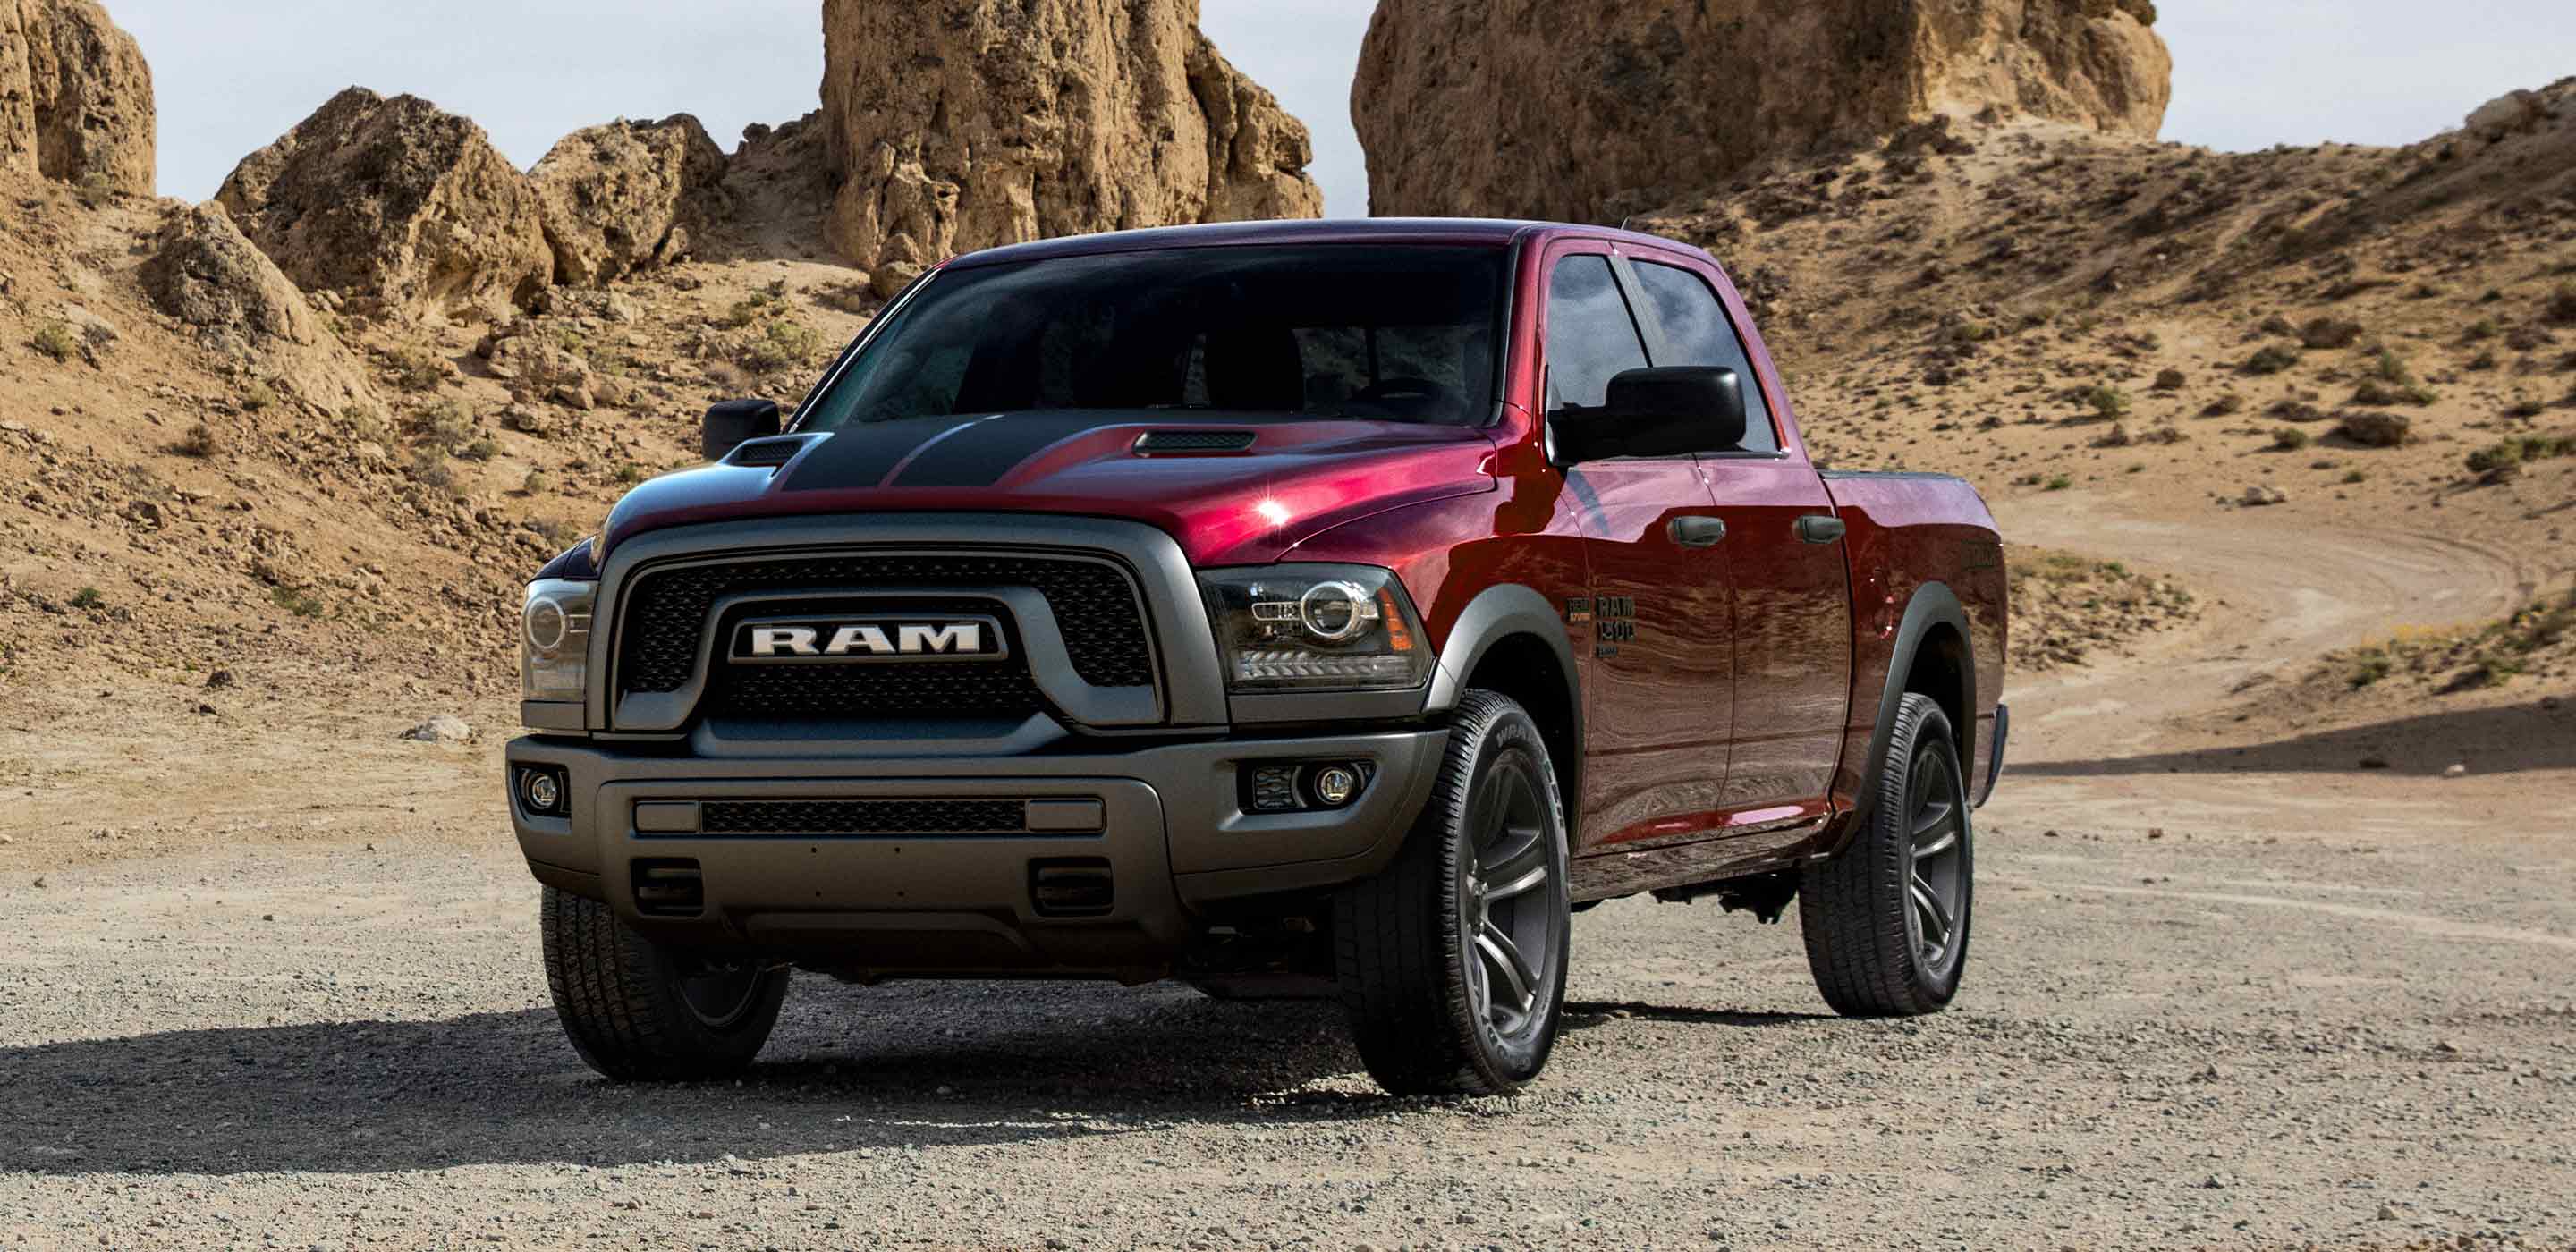 Display The 2022 Ram 1500 Classic parked on a twisting desert road with rocky outcroppings in the distance.